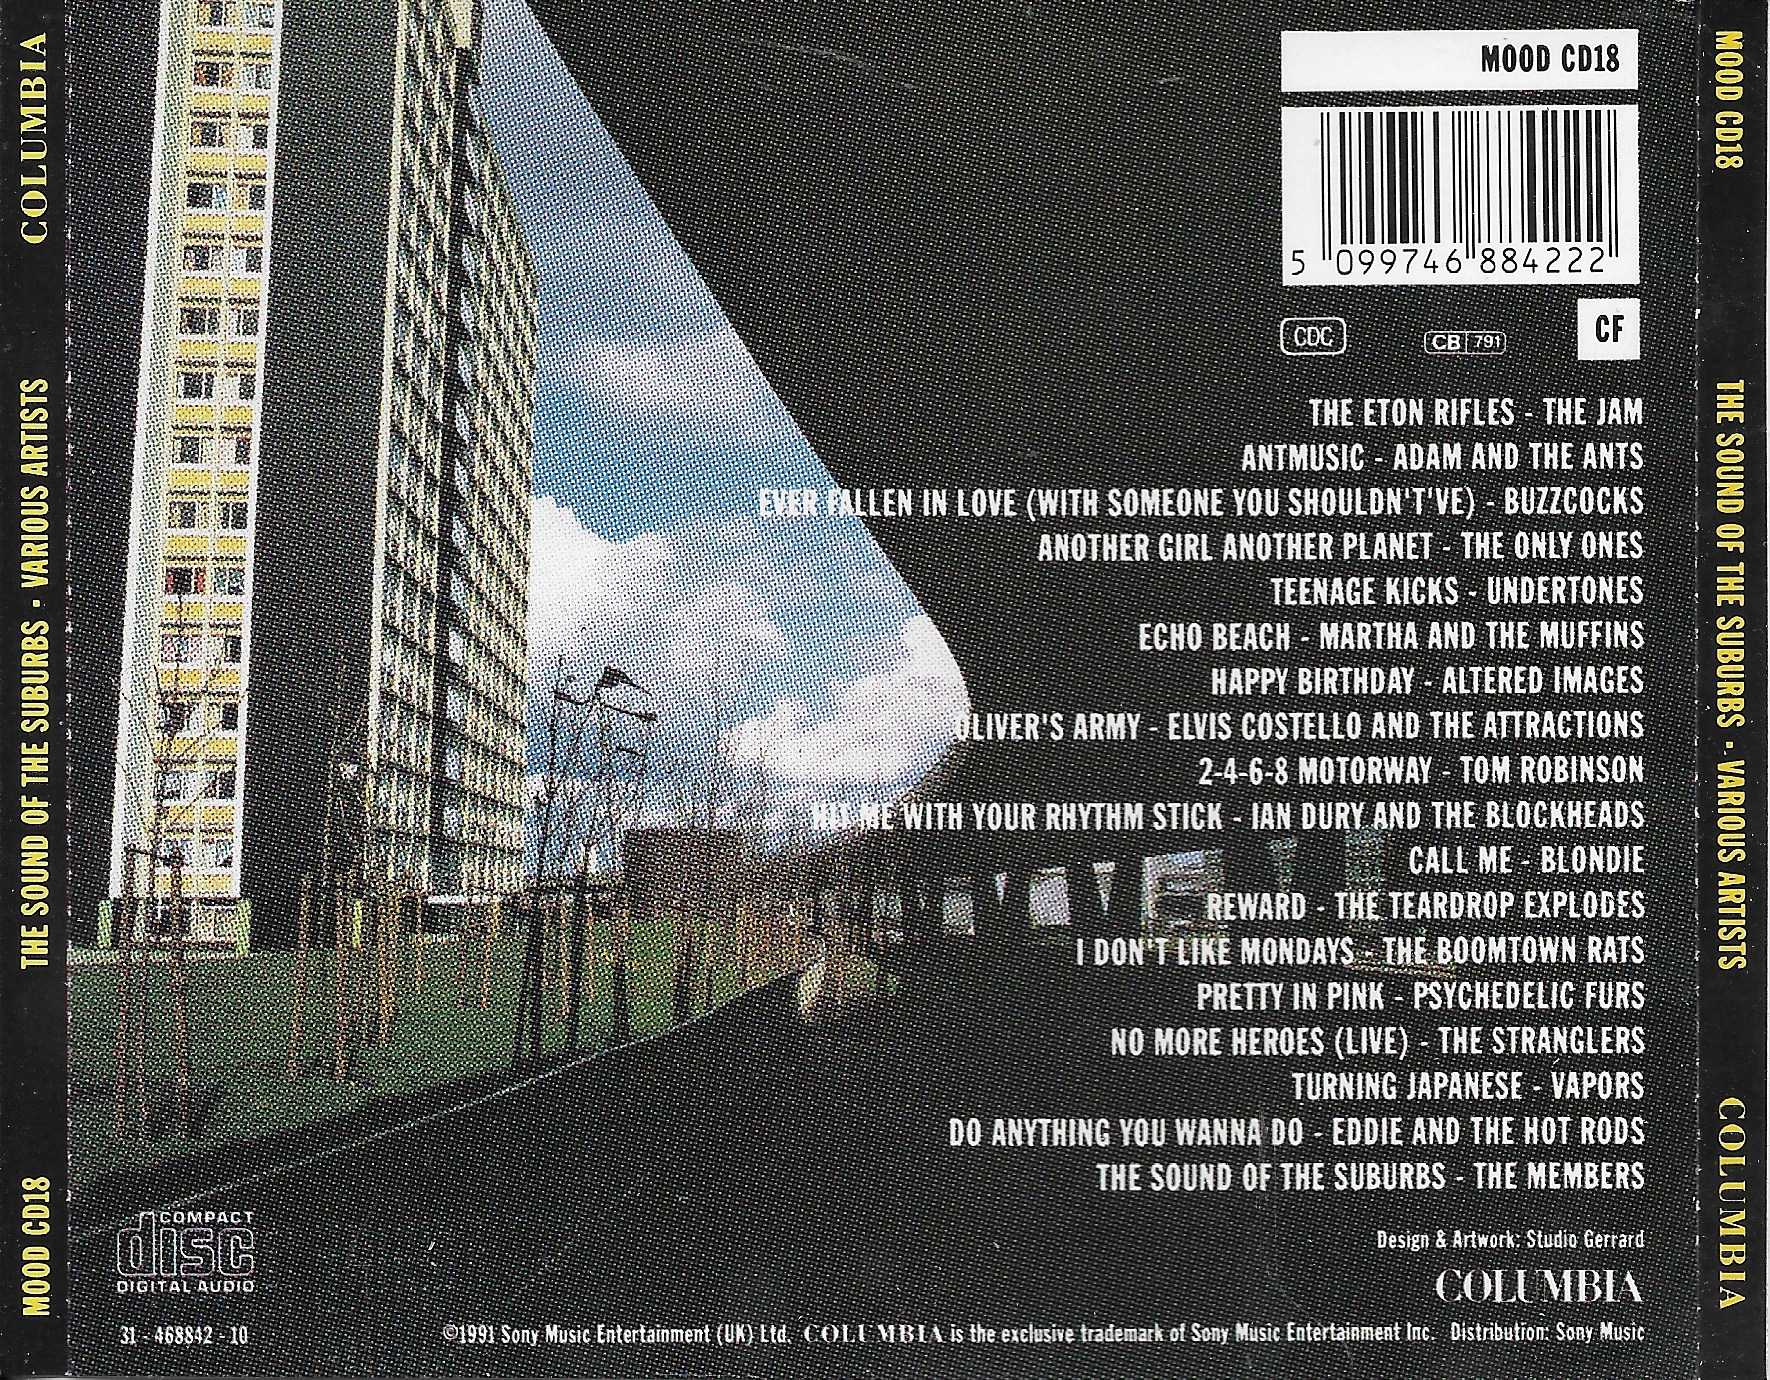 Back cover of MOODCD 18